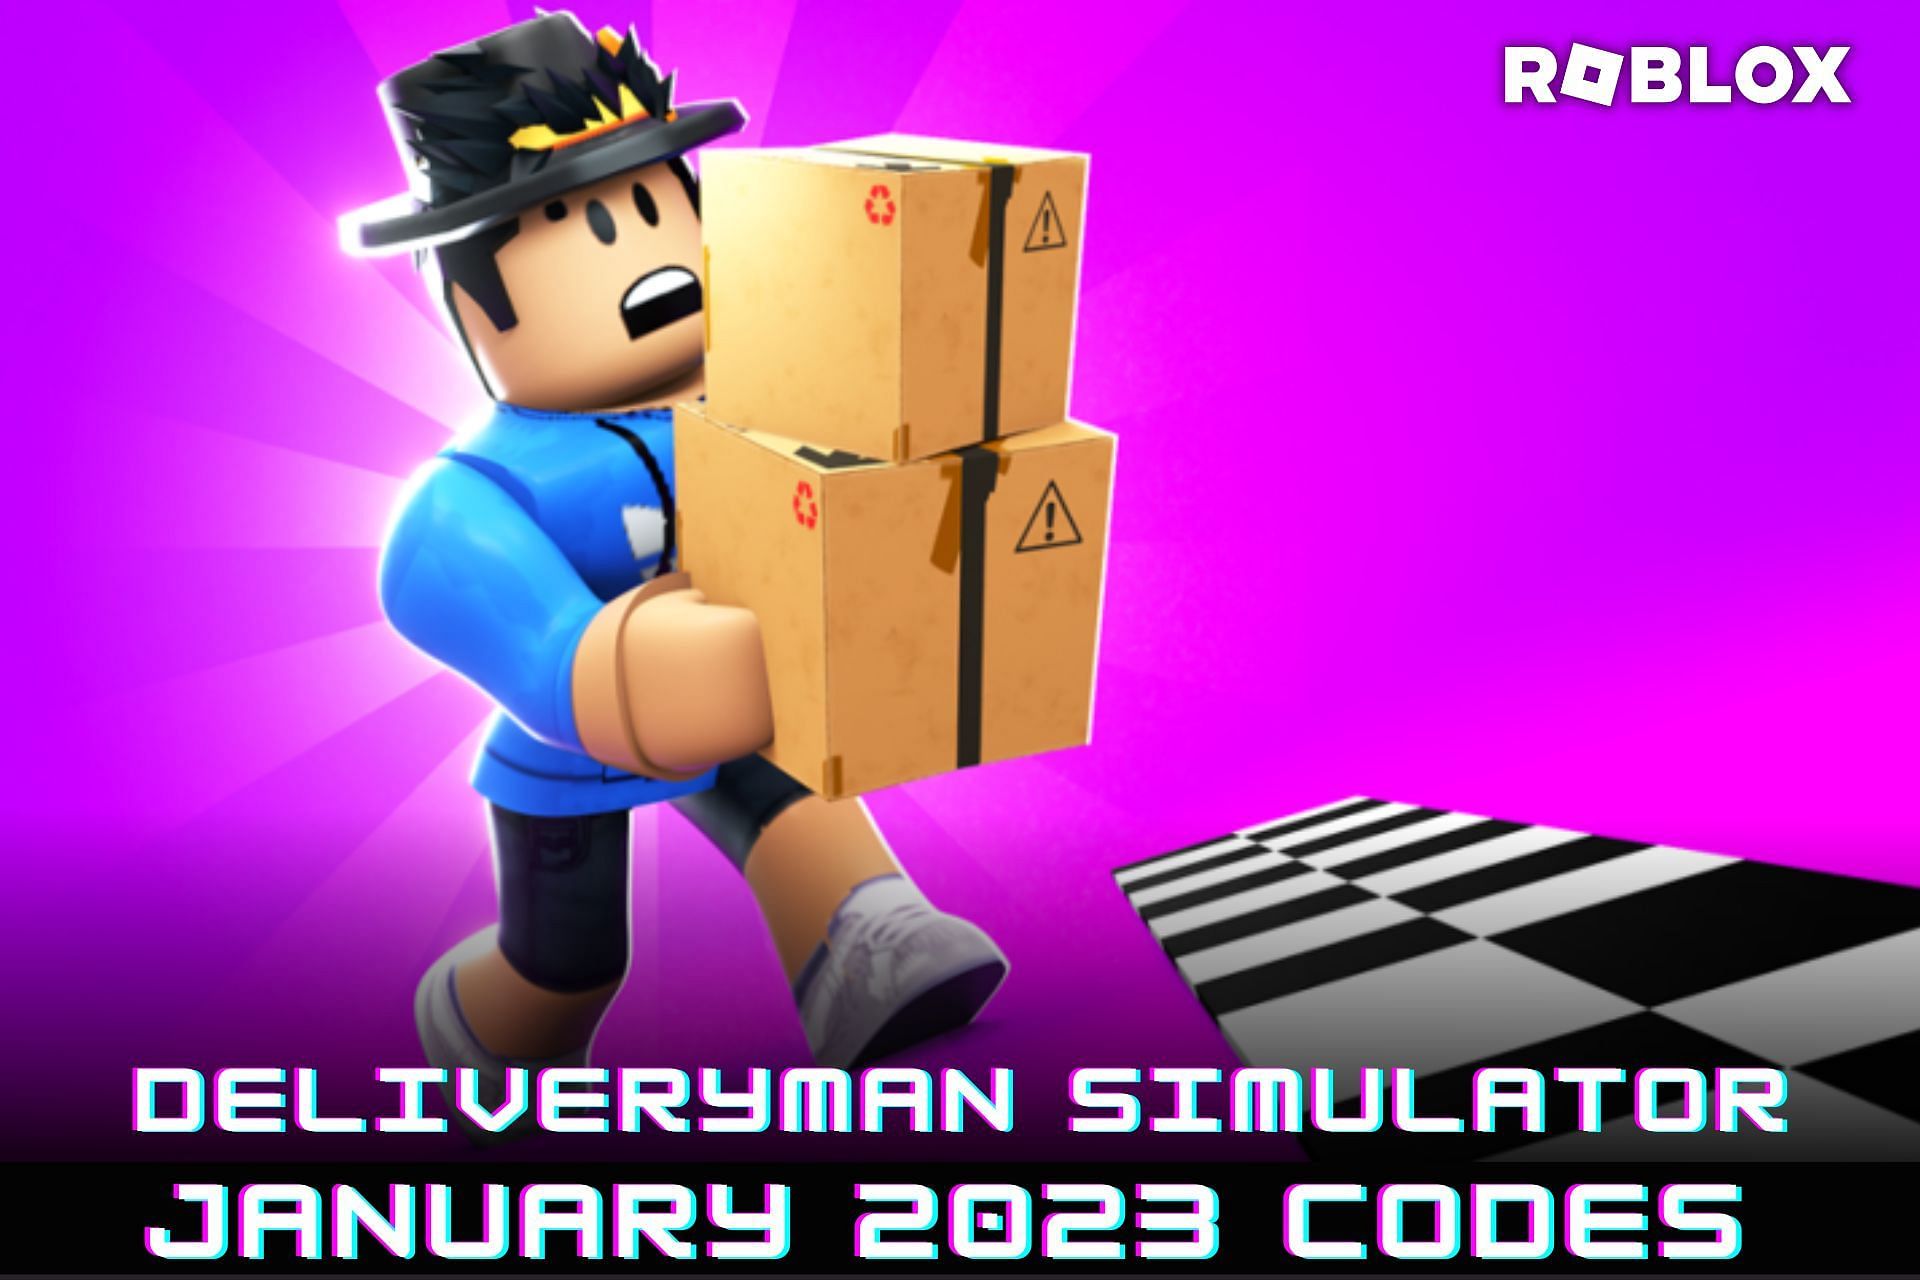 roblox-deliveryman-simulator-codes-for-january-2023-free-spins-boosts-and-more